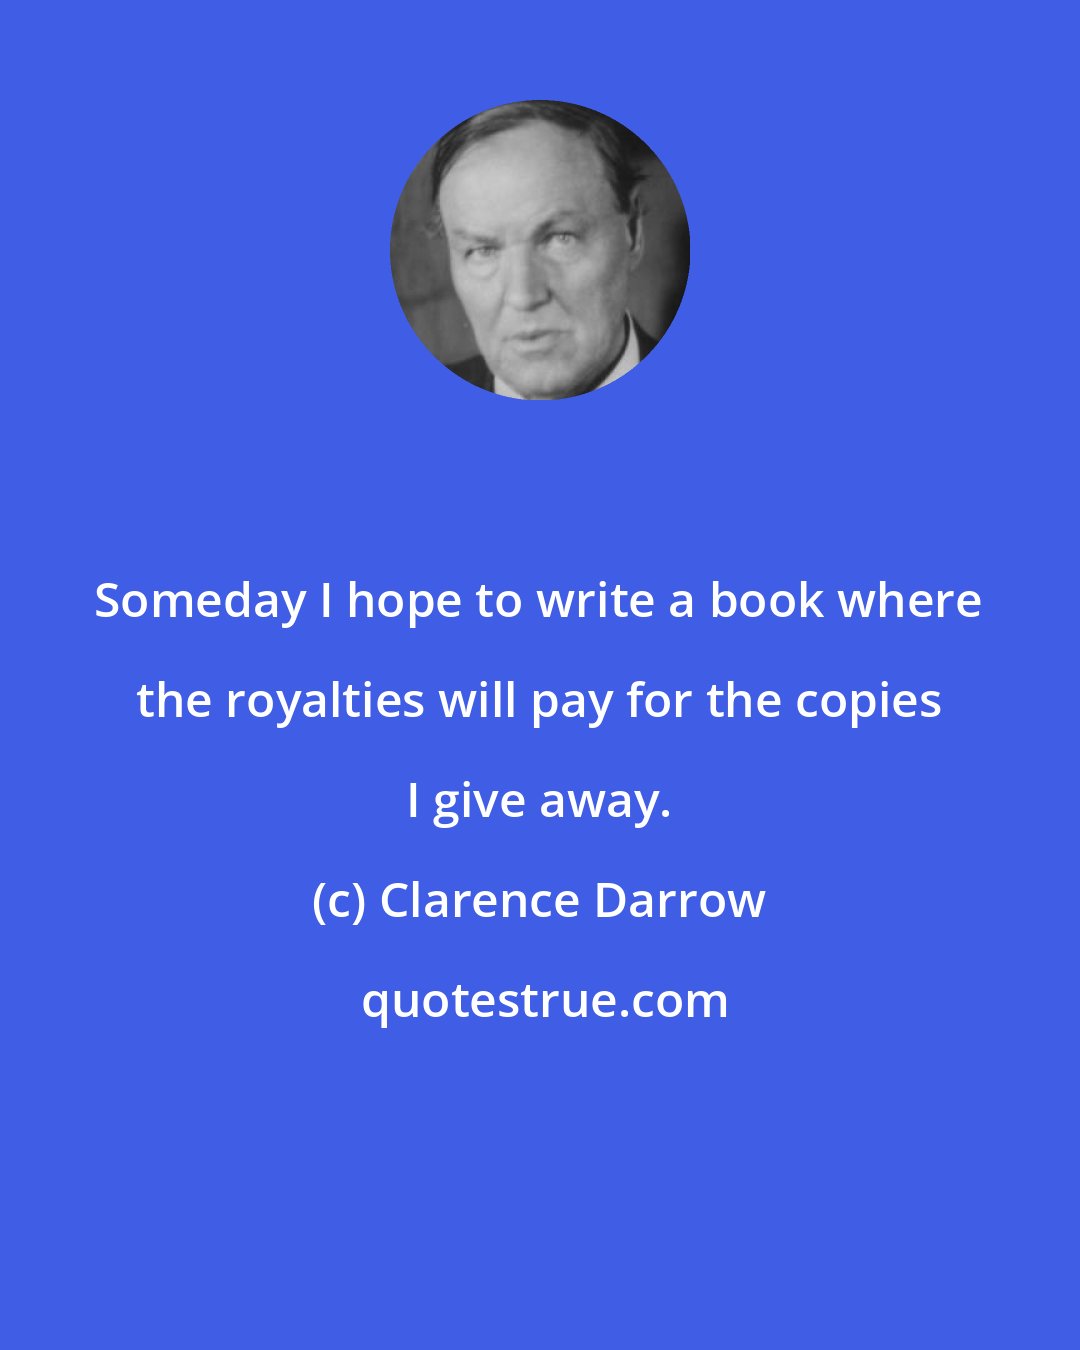 Clarence Darrow: Someday I hope to write a book where the royalties will pay for the copies I give away.